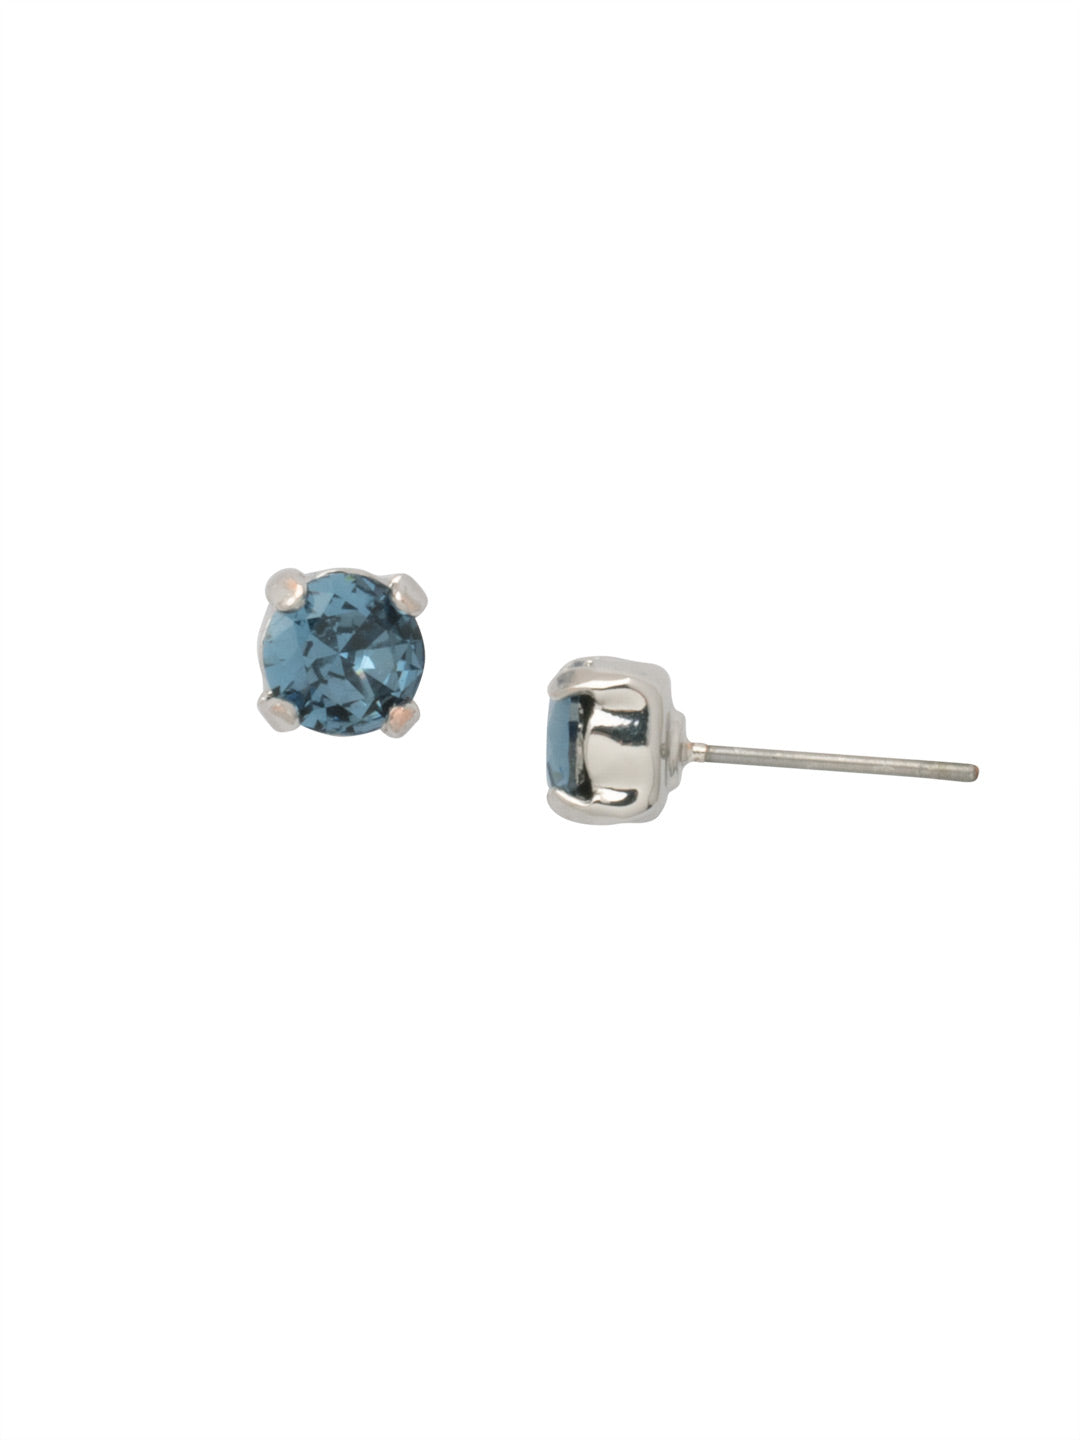 Jayda Stud Earrings - EDN32PDASP - <p>The Jayda Stud Earrings are the perfect every day wardrobe staple. A round crystal nestles perfectly in a metal plated post with four prongs. </p><p>Need help picking a stud? <a href="https://www.sorrelli.com/blogs/sisterhood/round-stud-earrings-101-a-rundown-of-sizes-styles-and-sparkle">Check out our size guide!</a> From Sorrelli's Aspen SKY collection in our Palladium finish.</p>